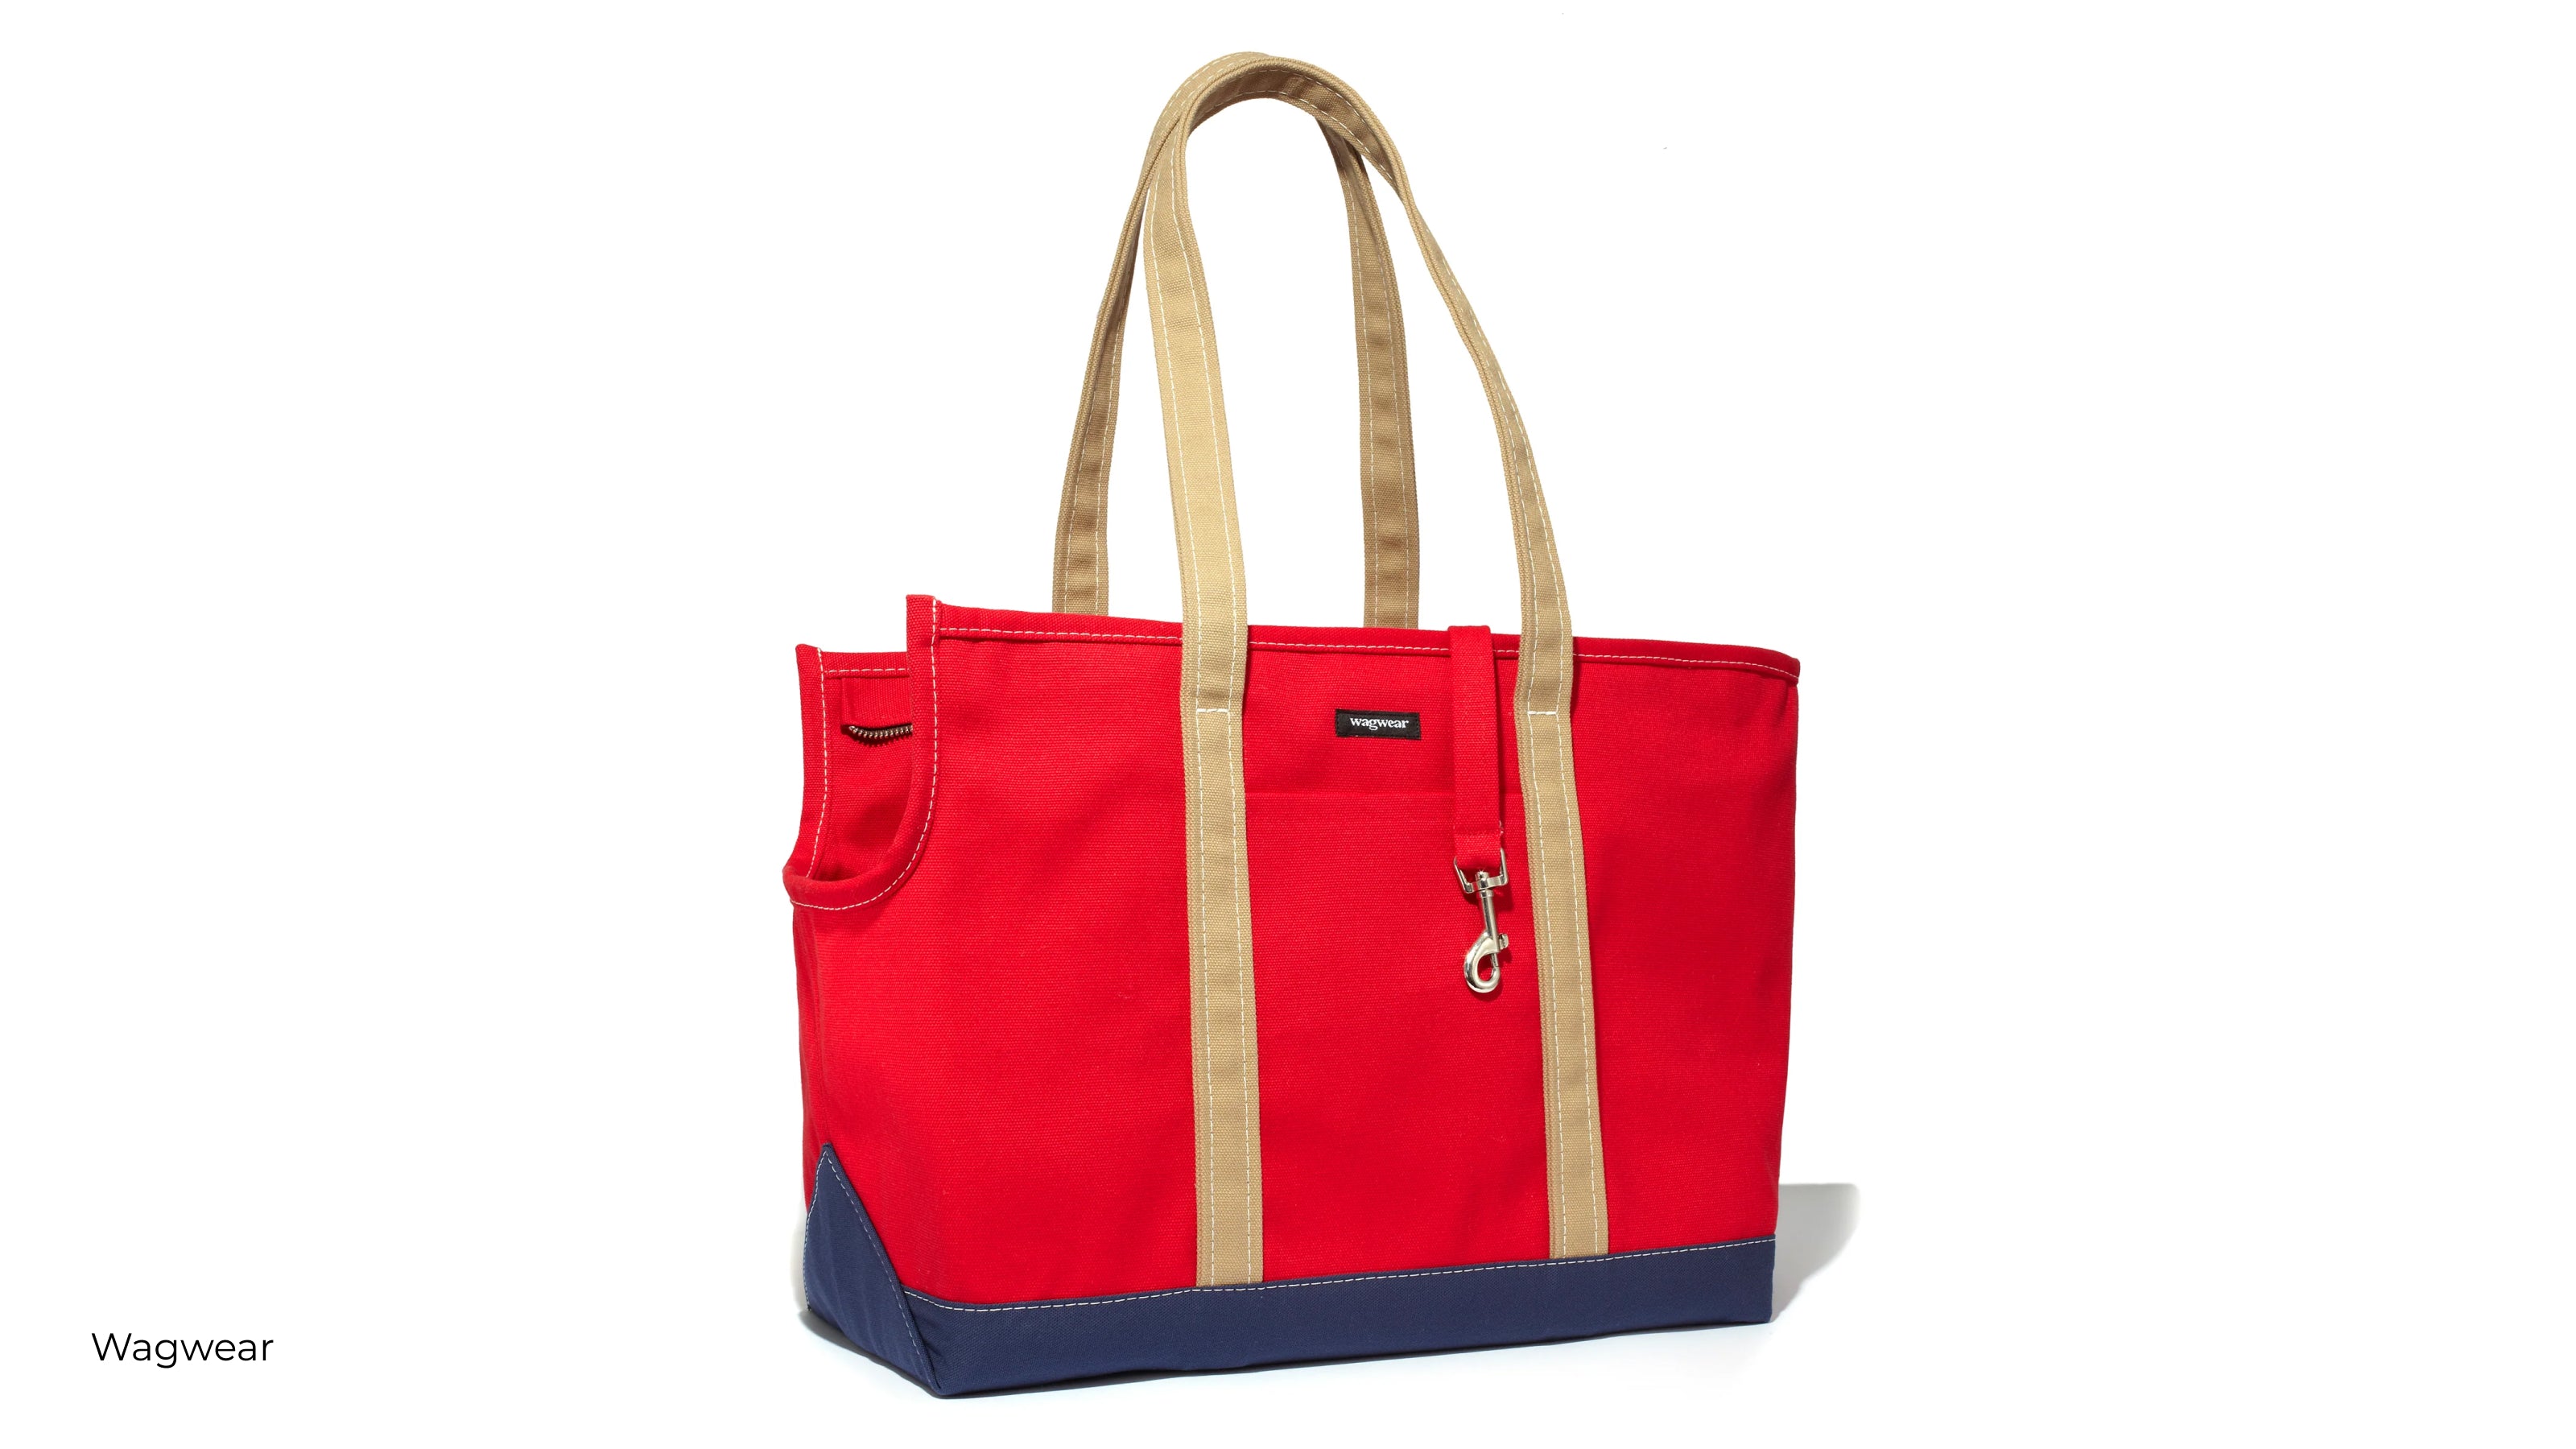 Canvas pet carrier from Wagwear in red navy and tan